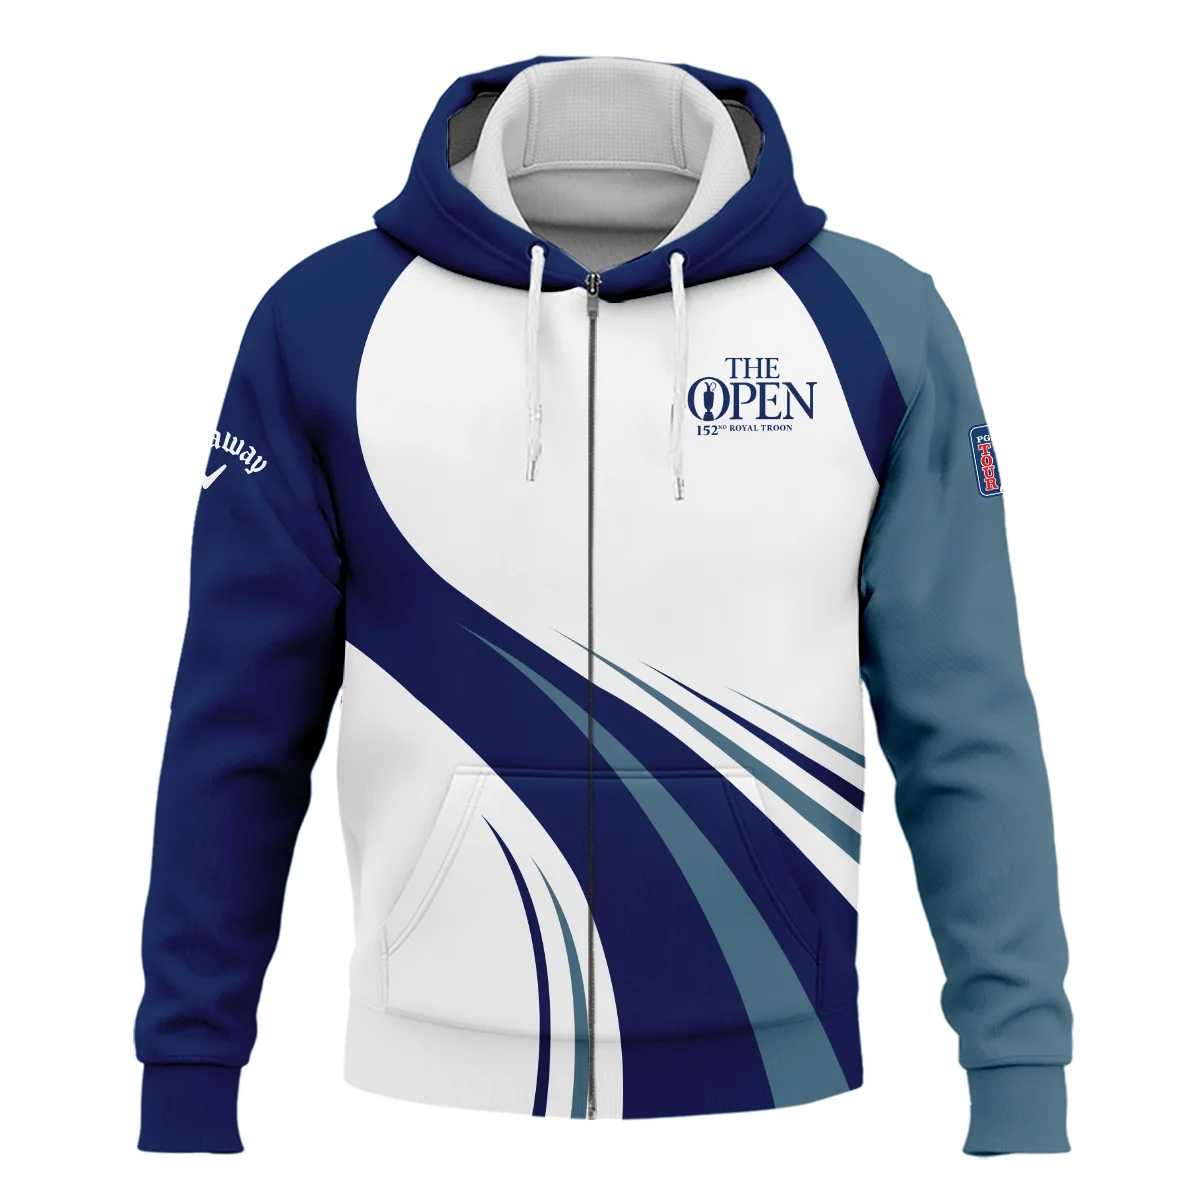 152nd Open Championship Callaway White Mostly Desaturated Dark Blue Hoodie Shirt All Over Prints HOTOP270624A02CLWHD